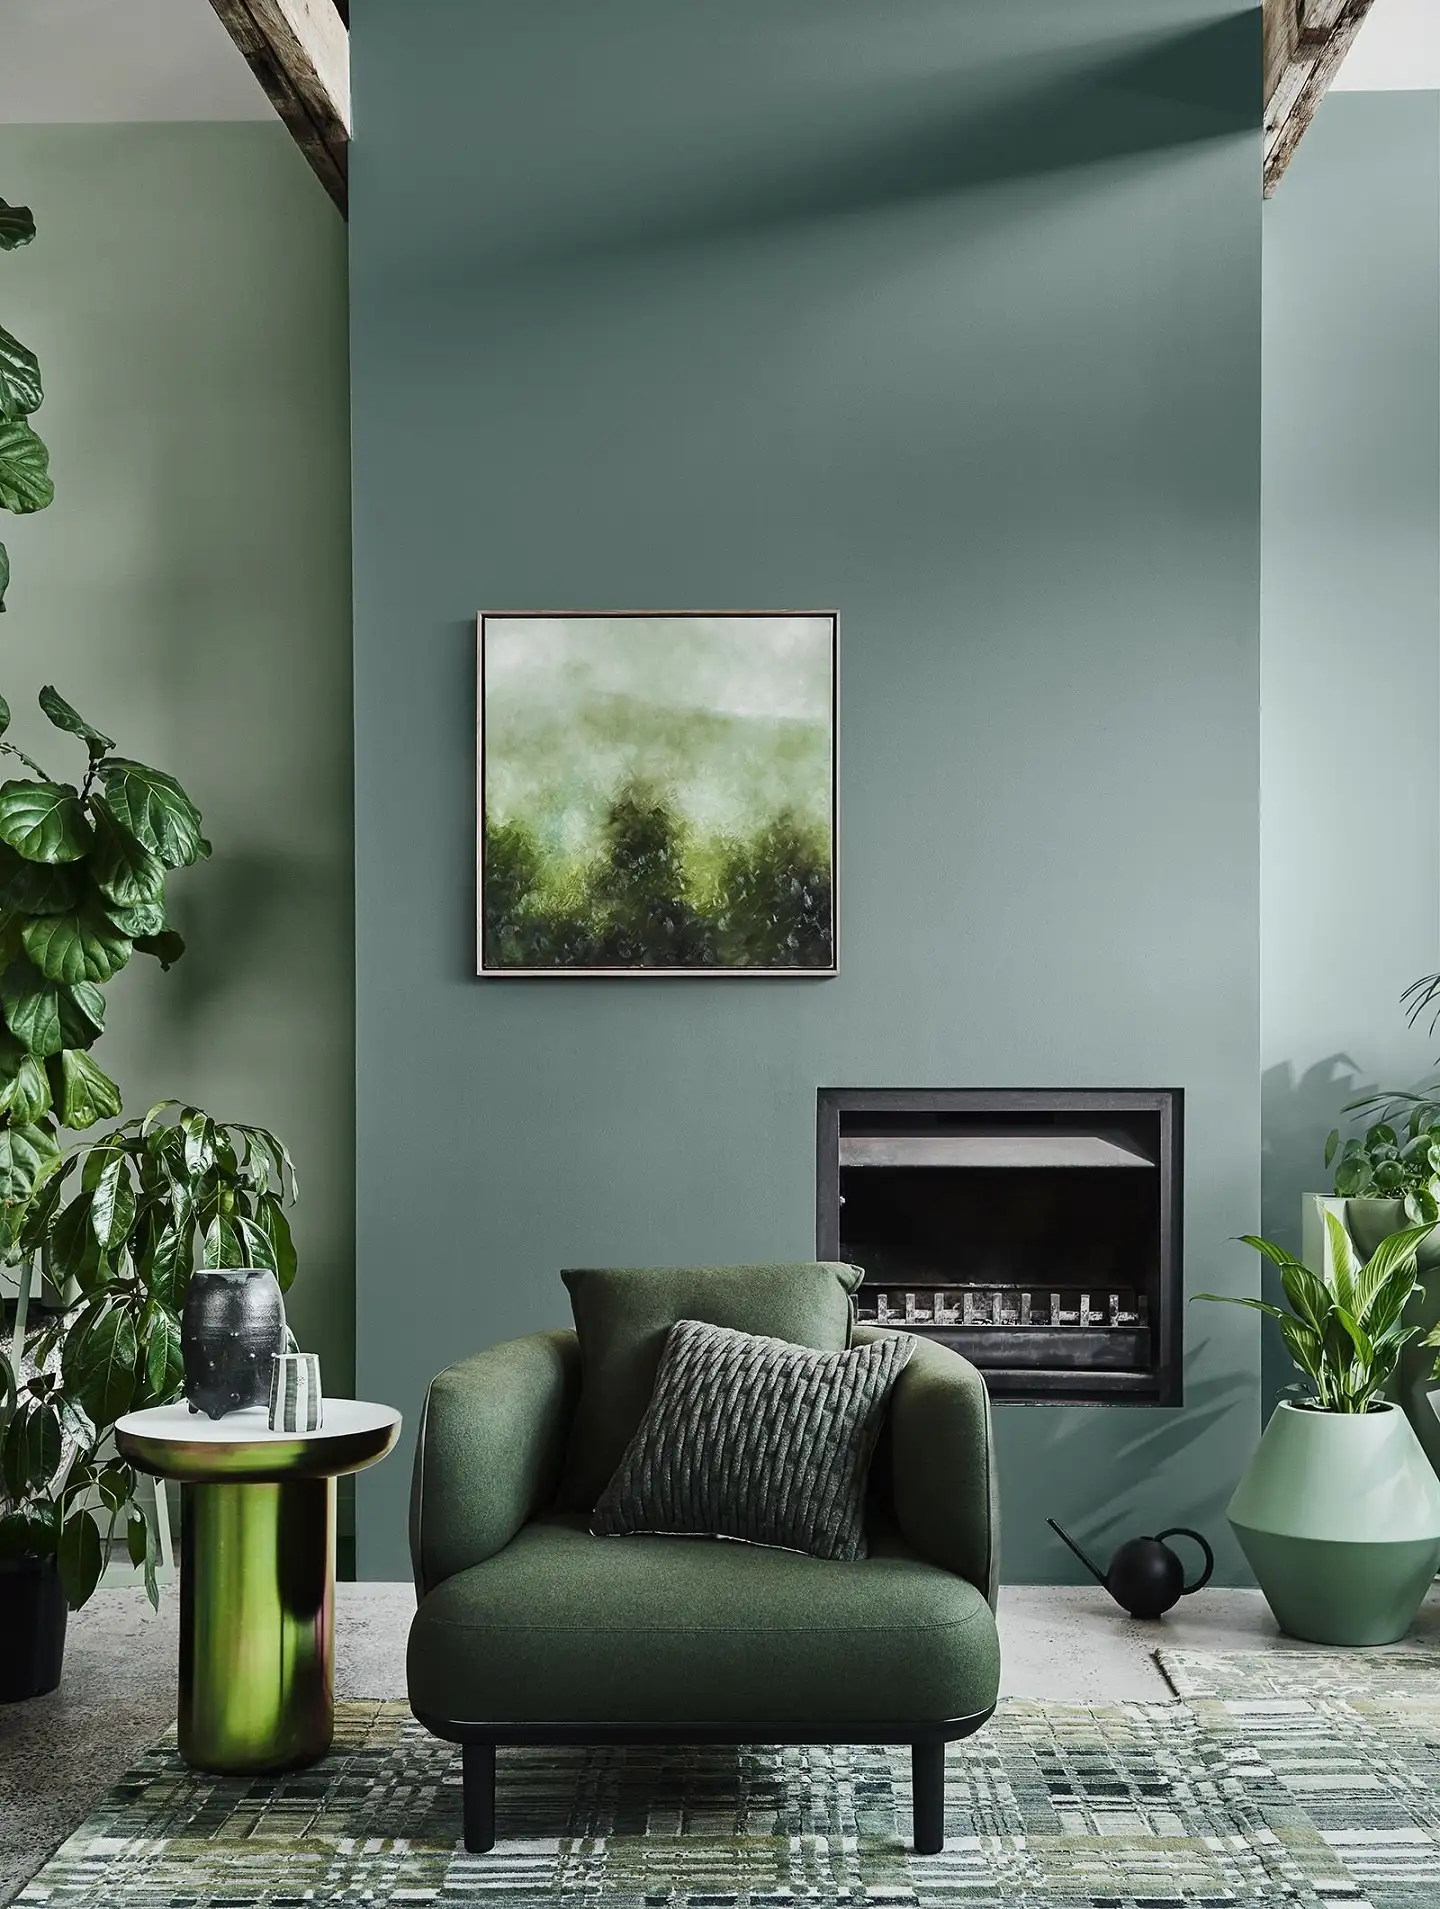 3. Nature-Inspired Greens for Balance